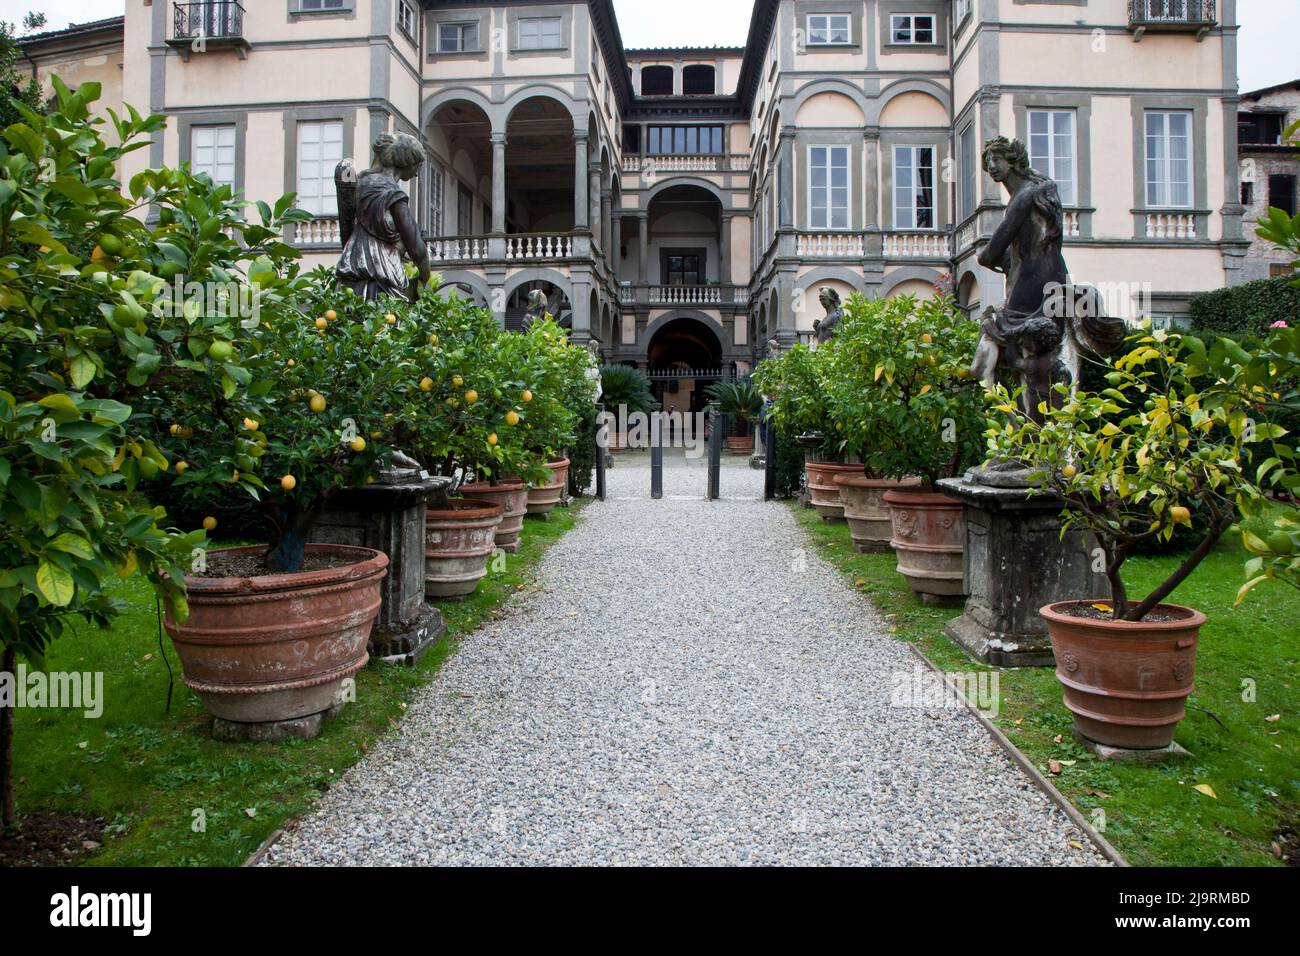 Italy, Tuscany, Lucca. Entrance to the View of Pfanner Palace and Garden on  a Summer Day Stock Photo - Alamy